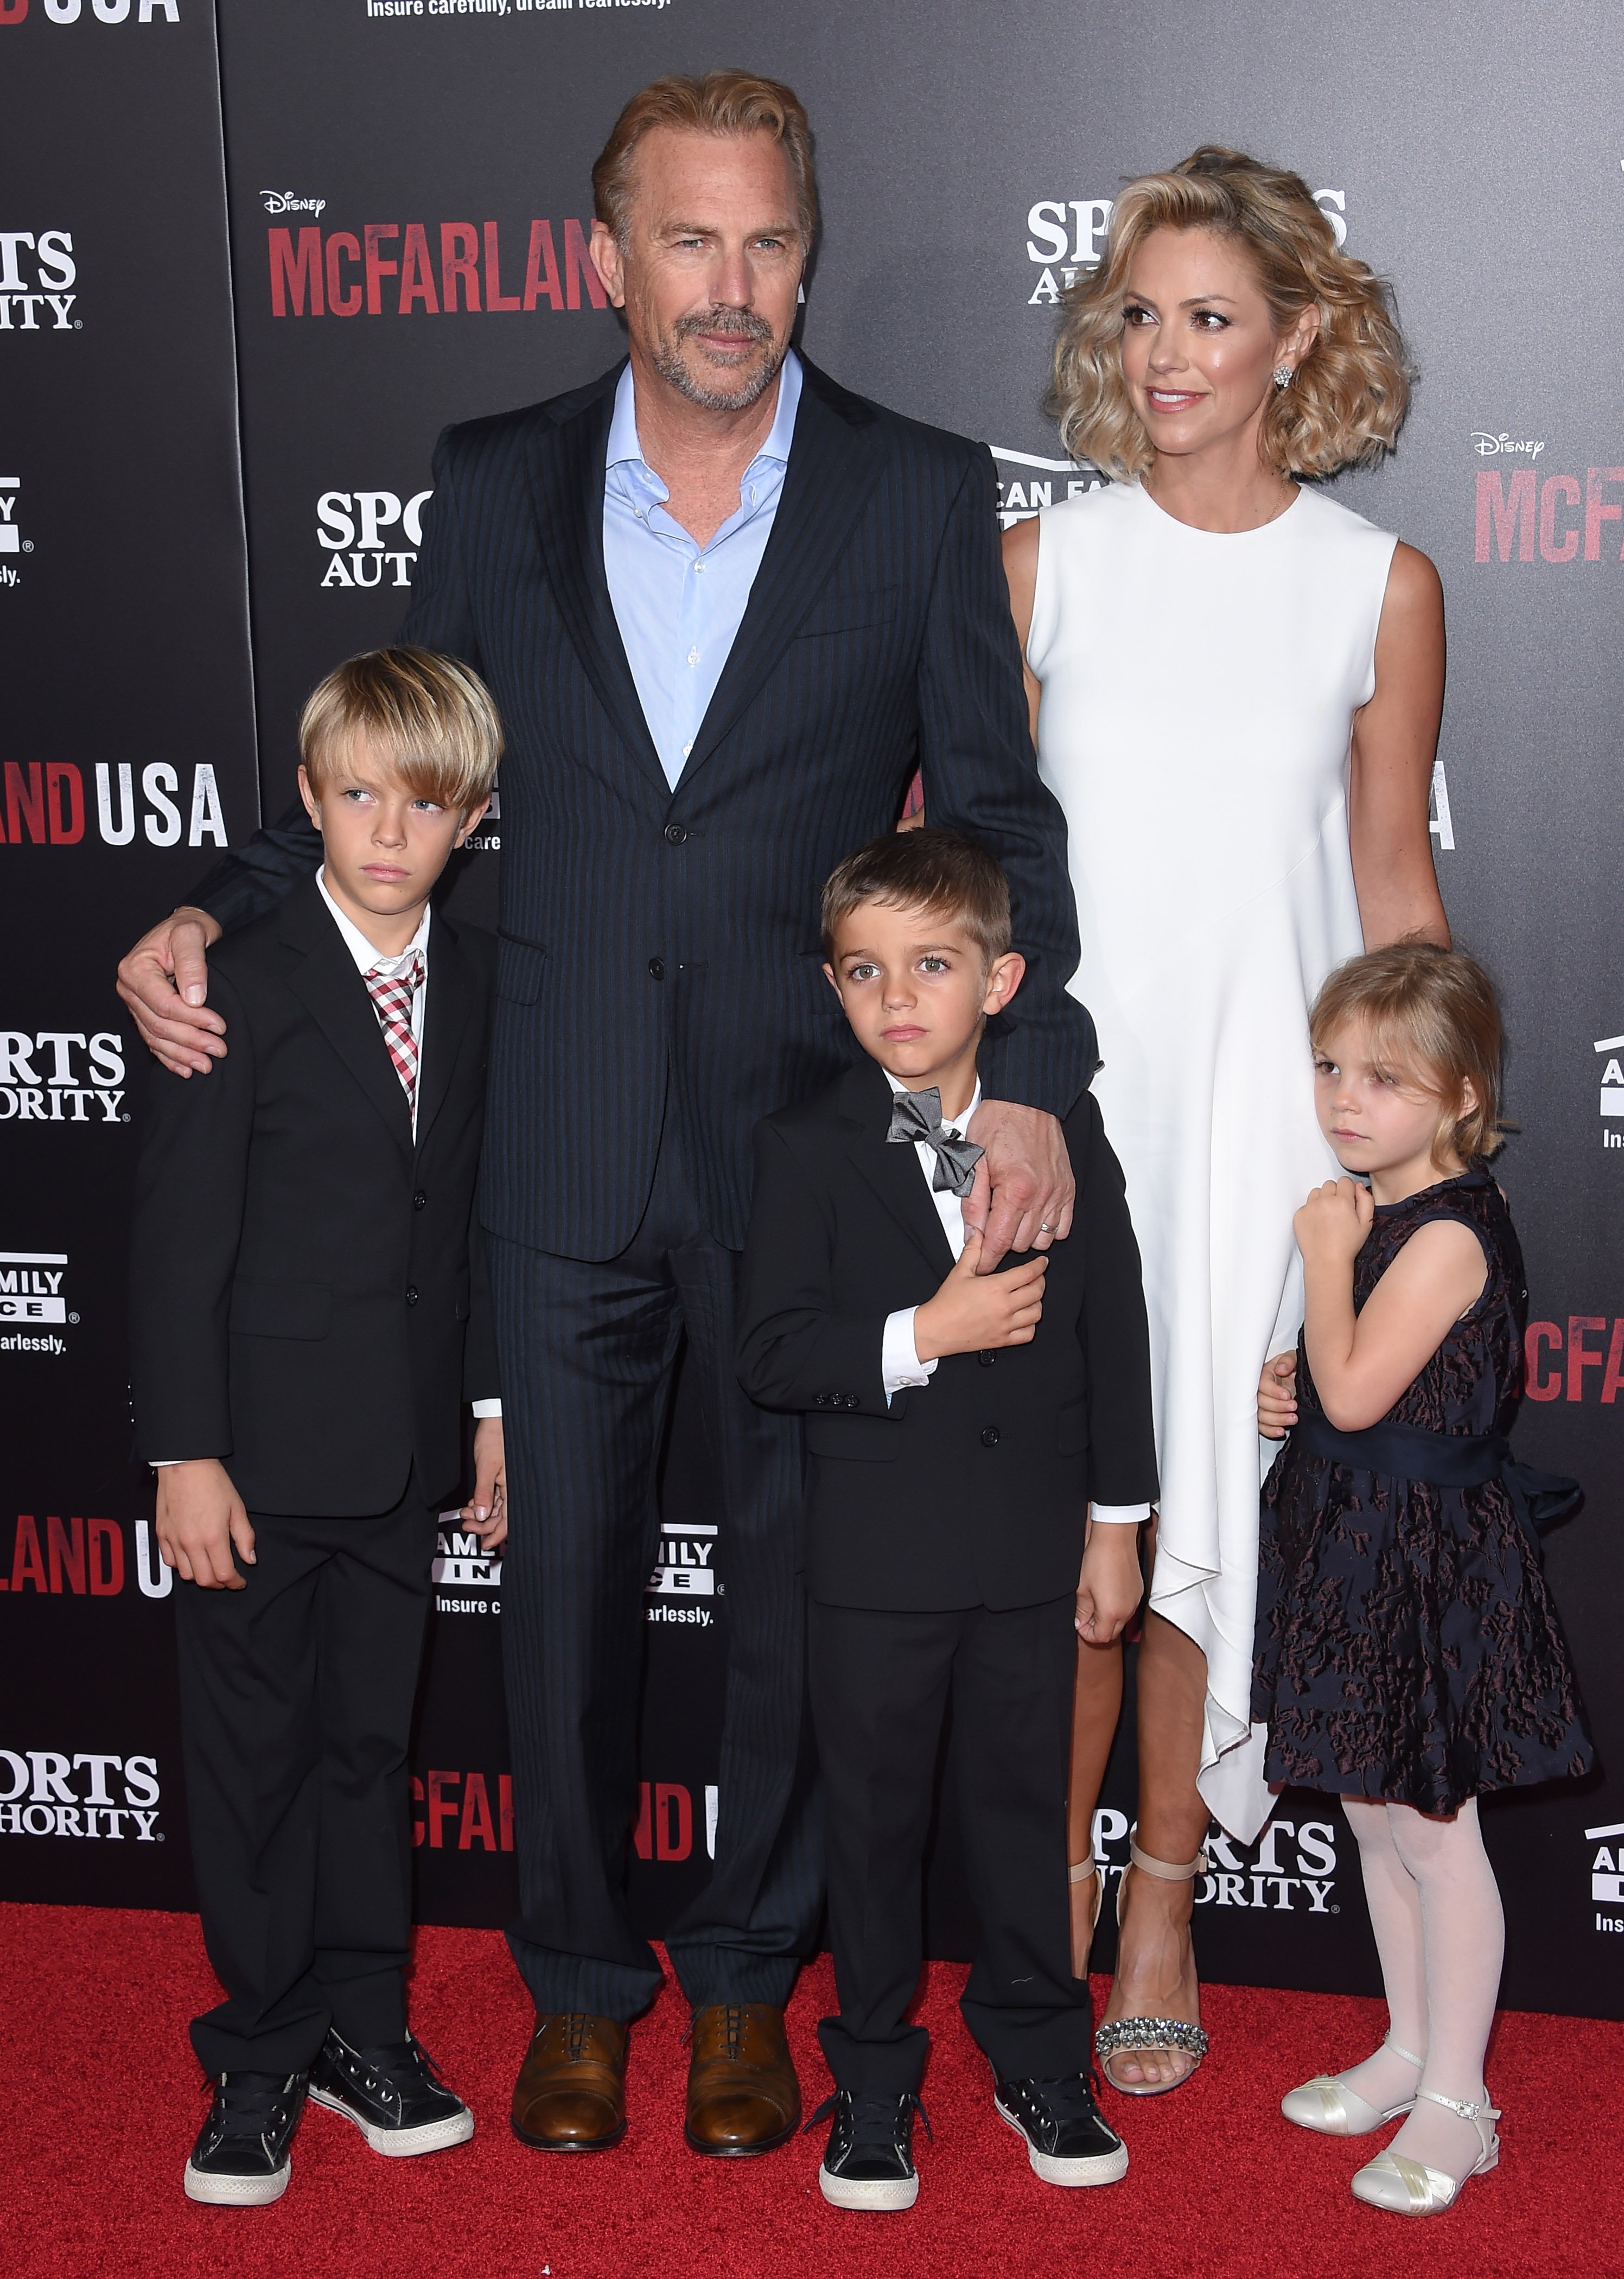 Kevin Costner, Christine Baumgartner, and their children, Cayden, Hayes, and Grace Costner at the world premiere of "McFarland, USA" on February 9, 2015, in Hollywood, California. | Source: Getty Images